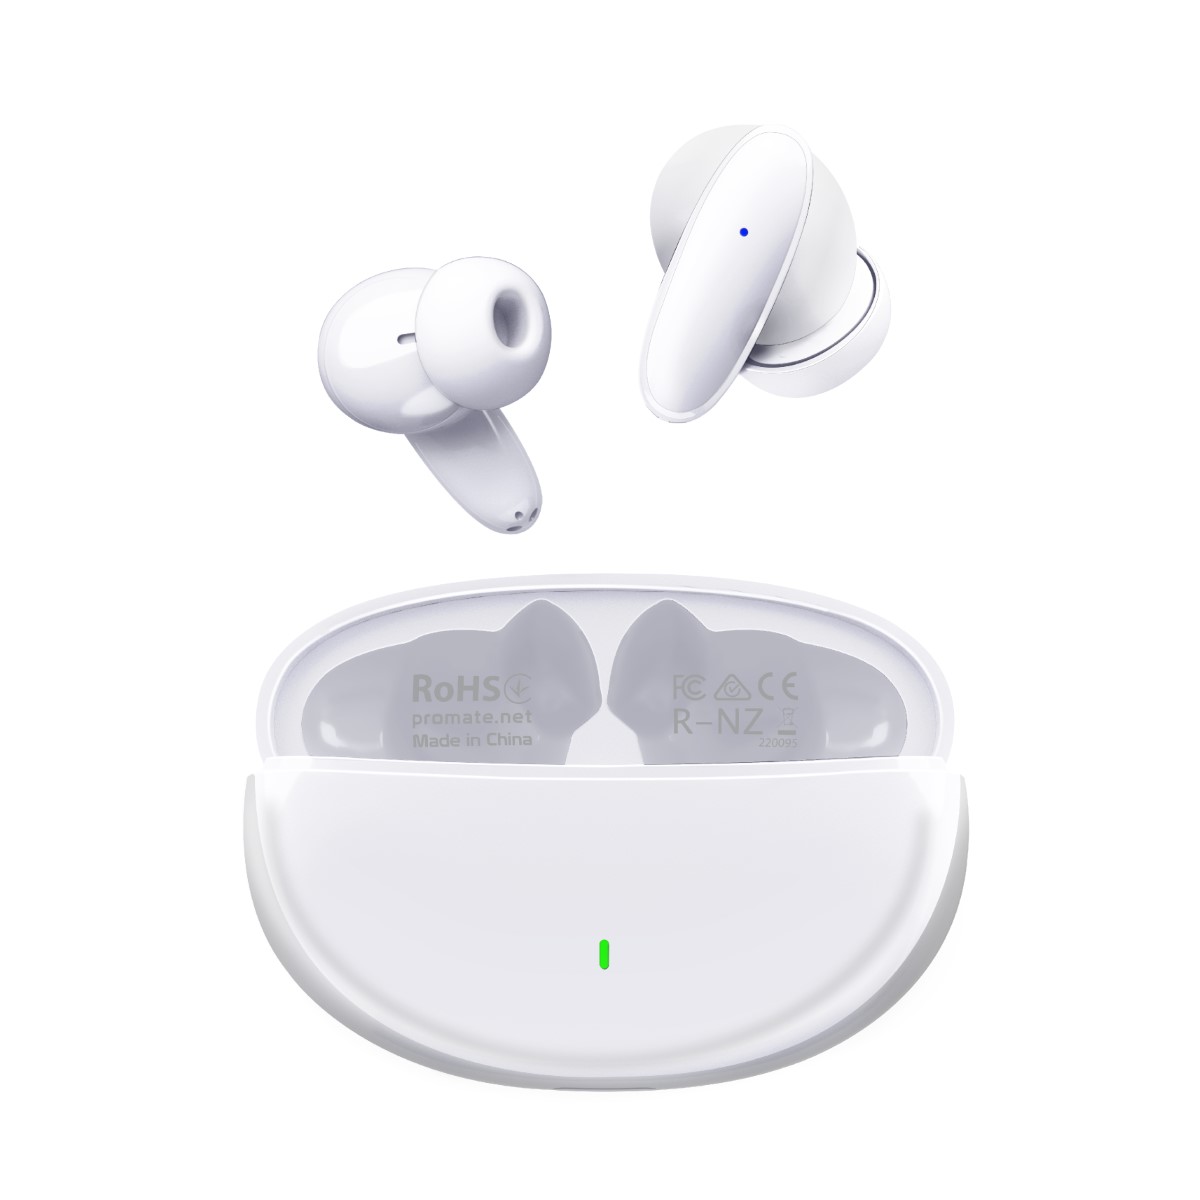 Promate True Wireless Earbuds with Bluetooth v5.1, Mic, IPX5 Water Resistance and Auto Pairing, Lush White